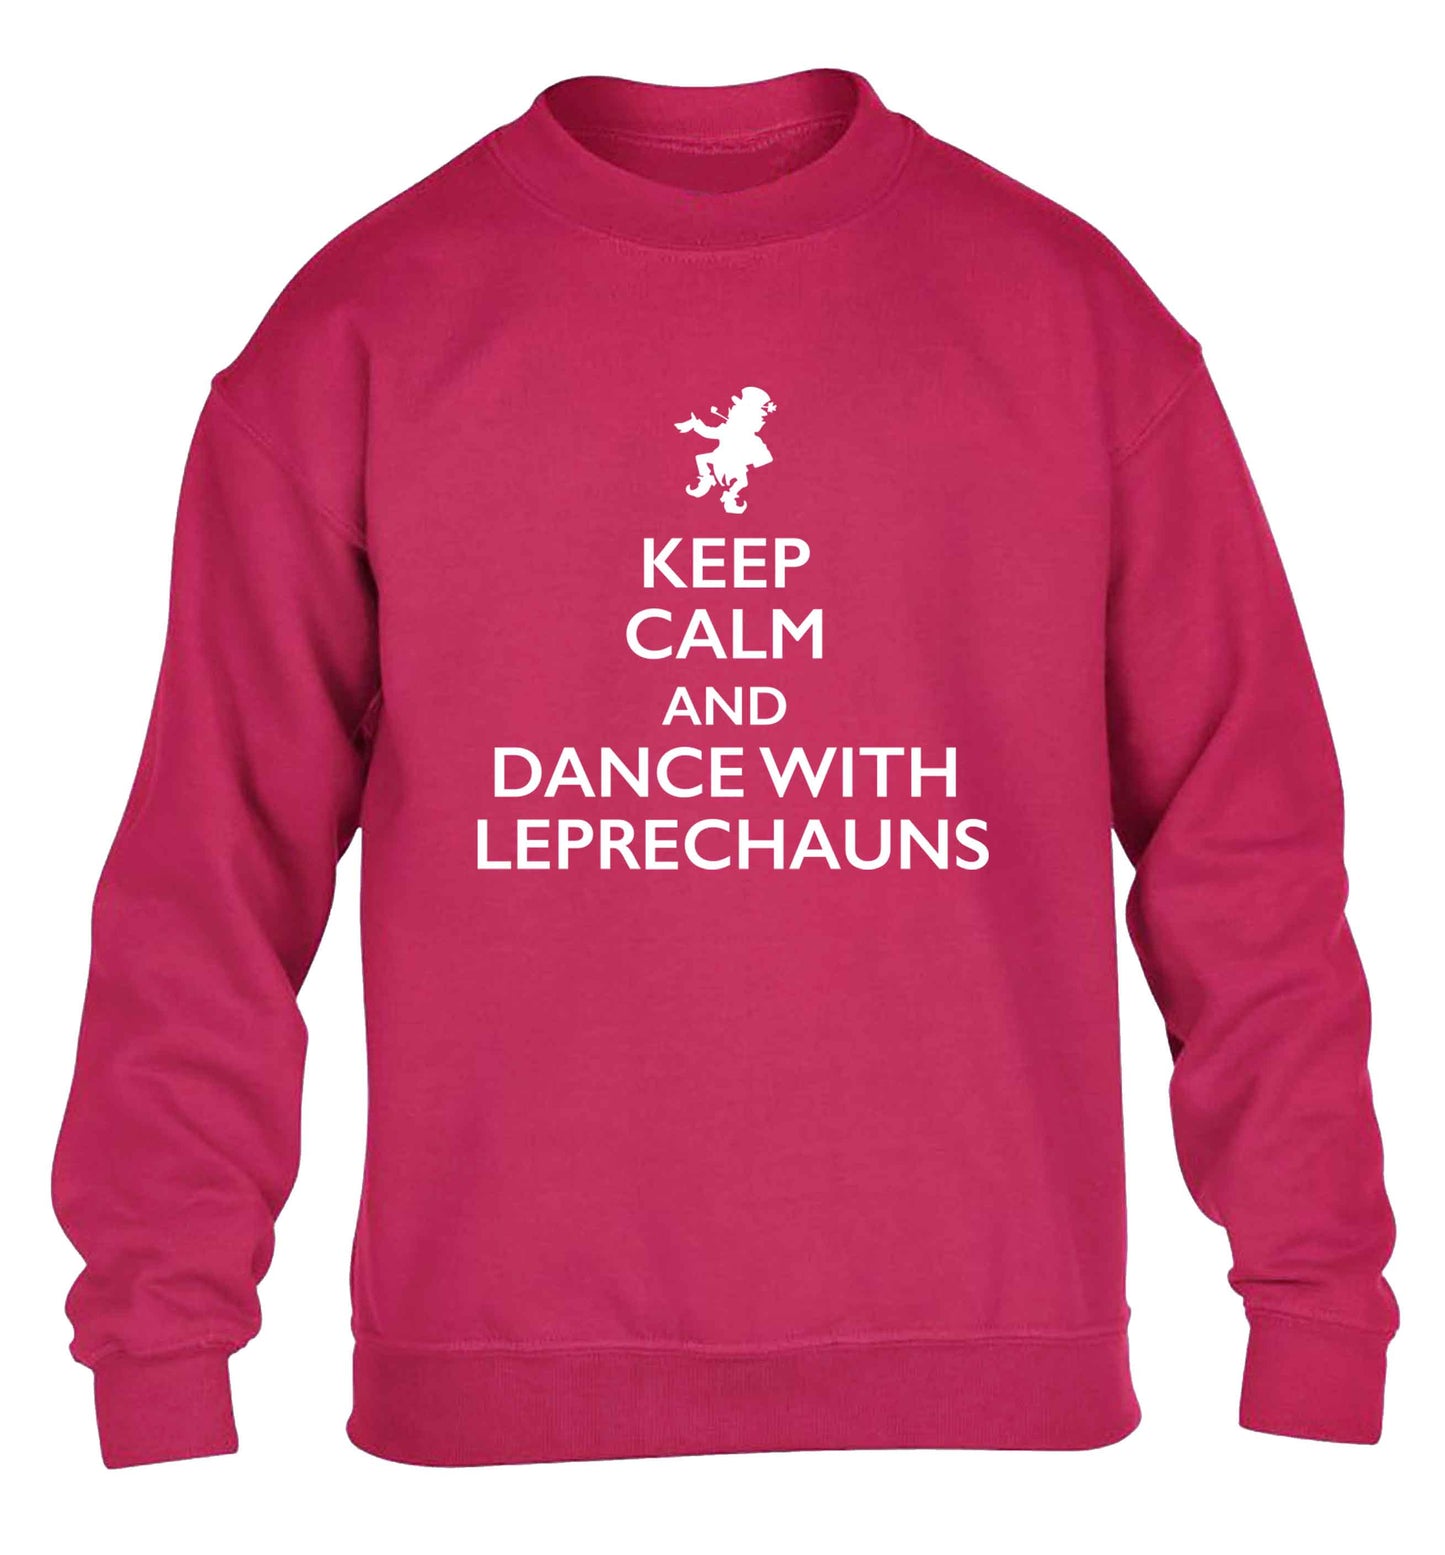 Keep calm and dance with leprechauns children's pink sweater 12-13 Years